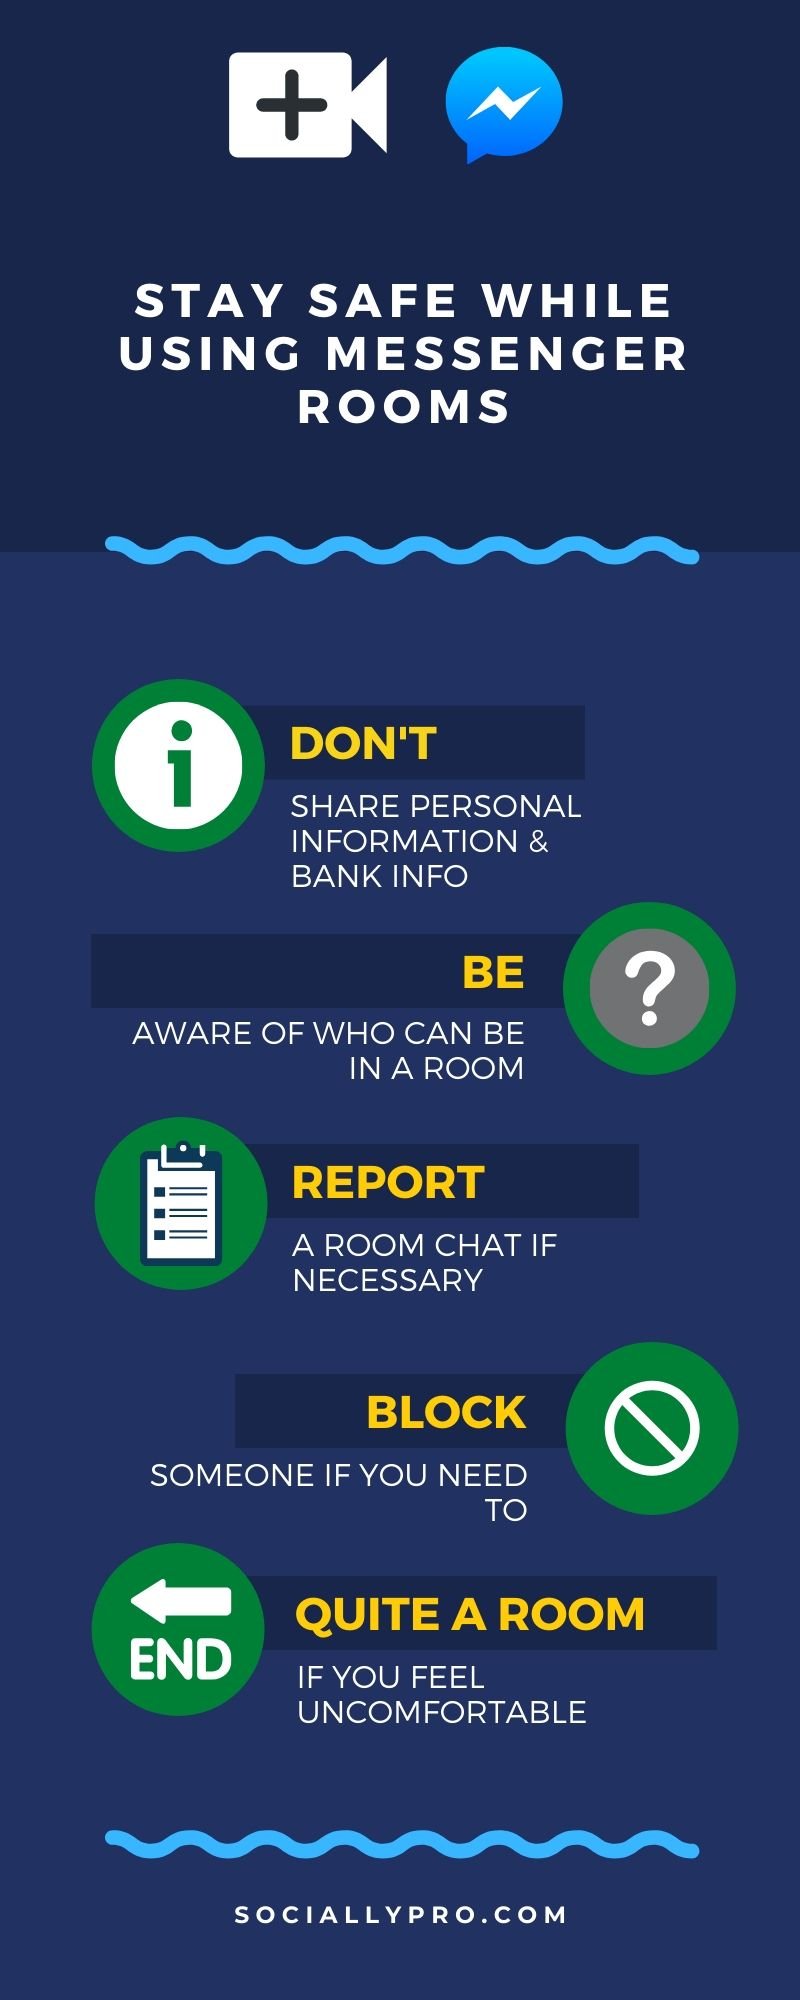 Infographic to Stay Safe While Using Messenger Rooms